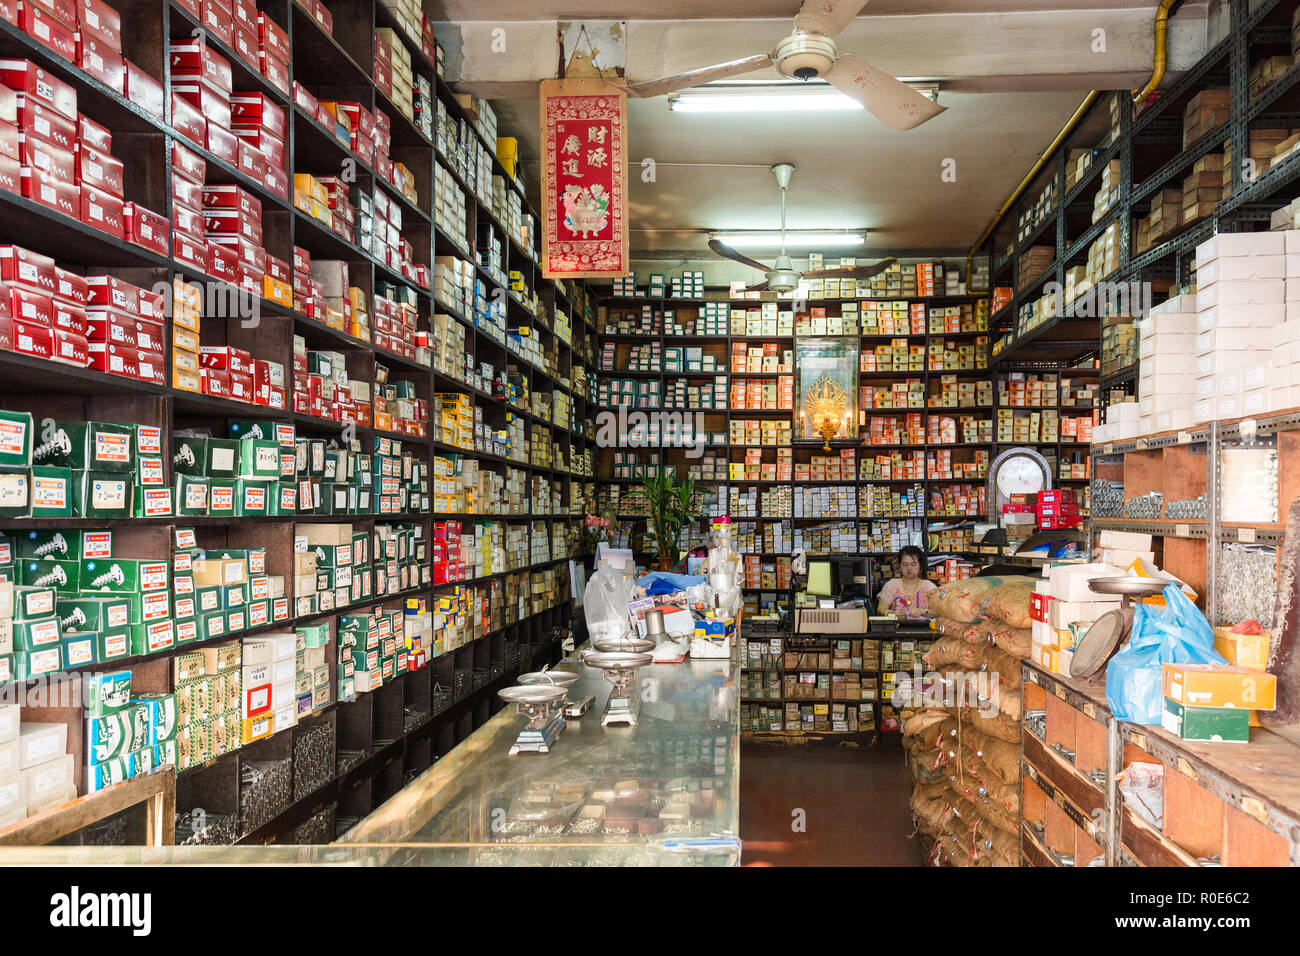 BANGKOK, THAILAND, JANUARY 15, 2015 : View inside a Chinese hardware store in the Chinatown district of Bangkok, Thailand Stock Photo